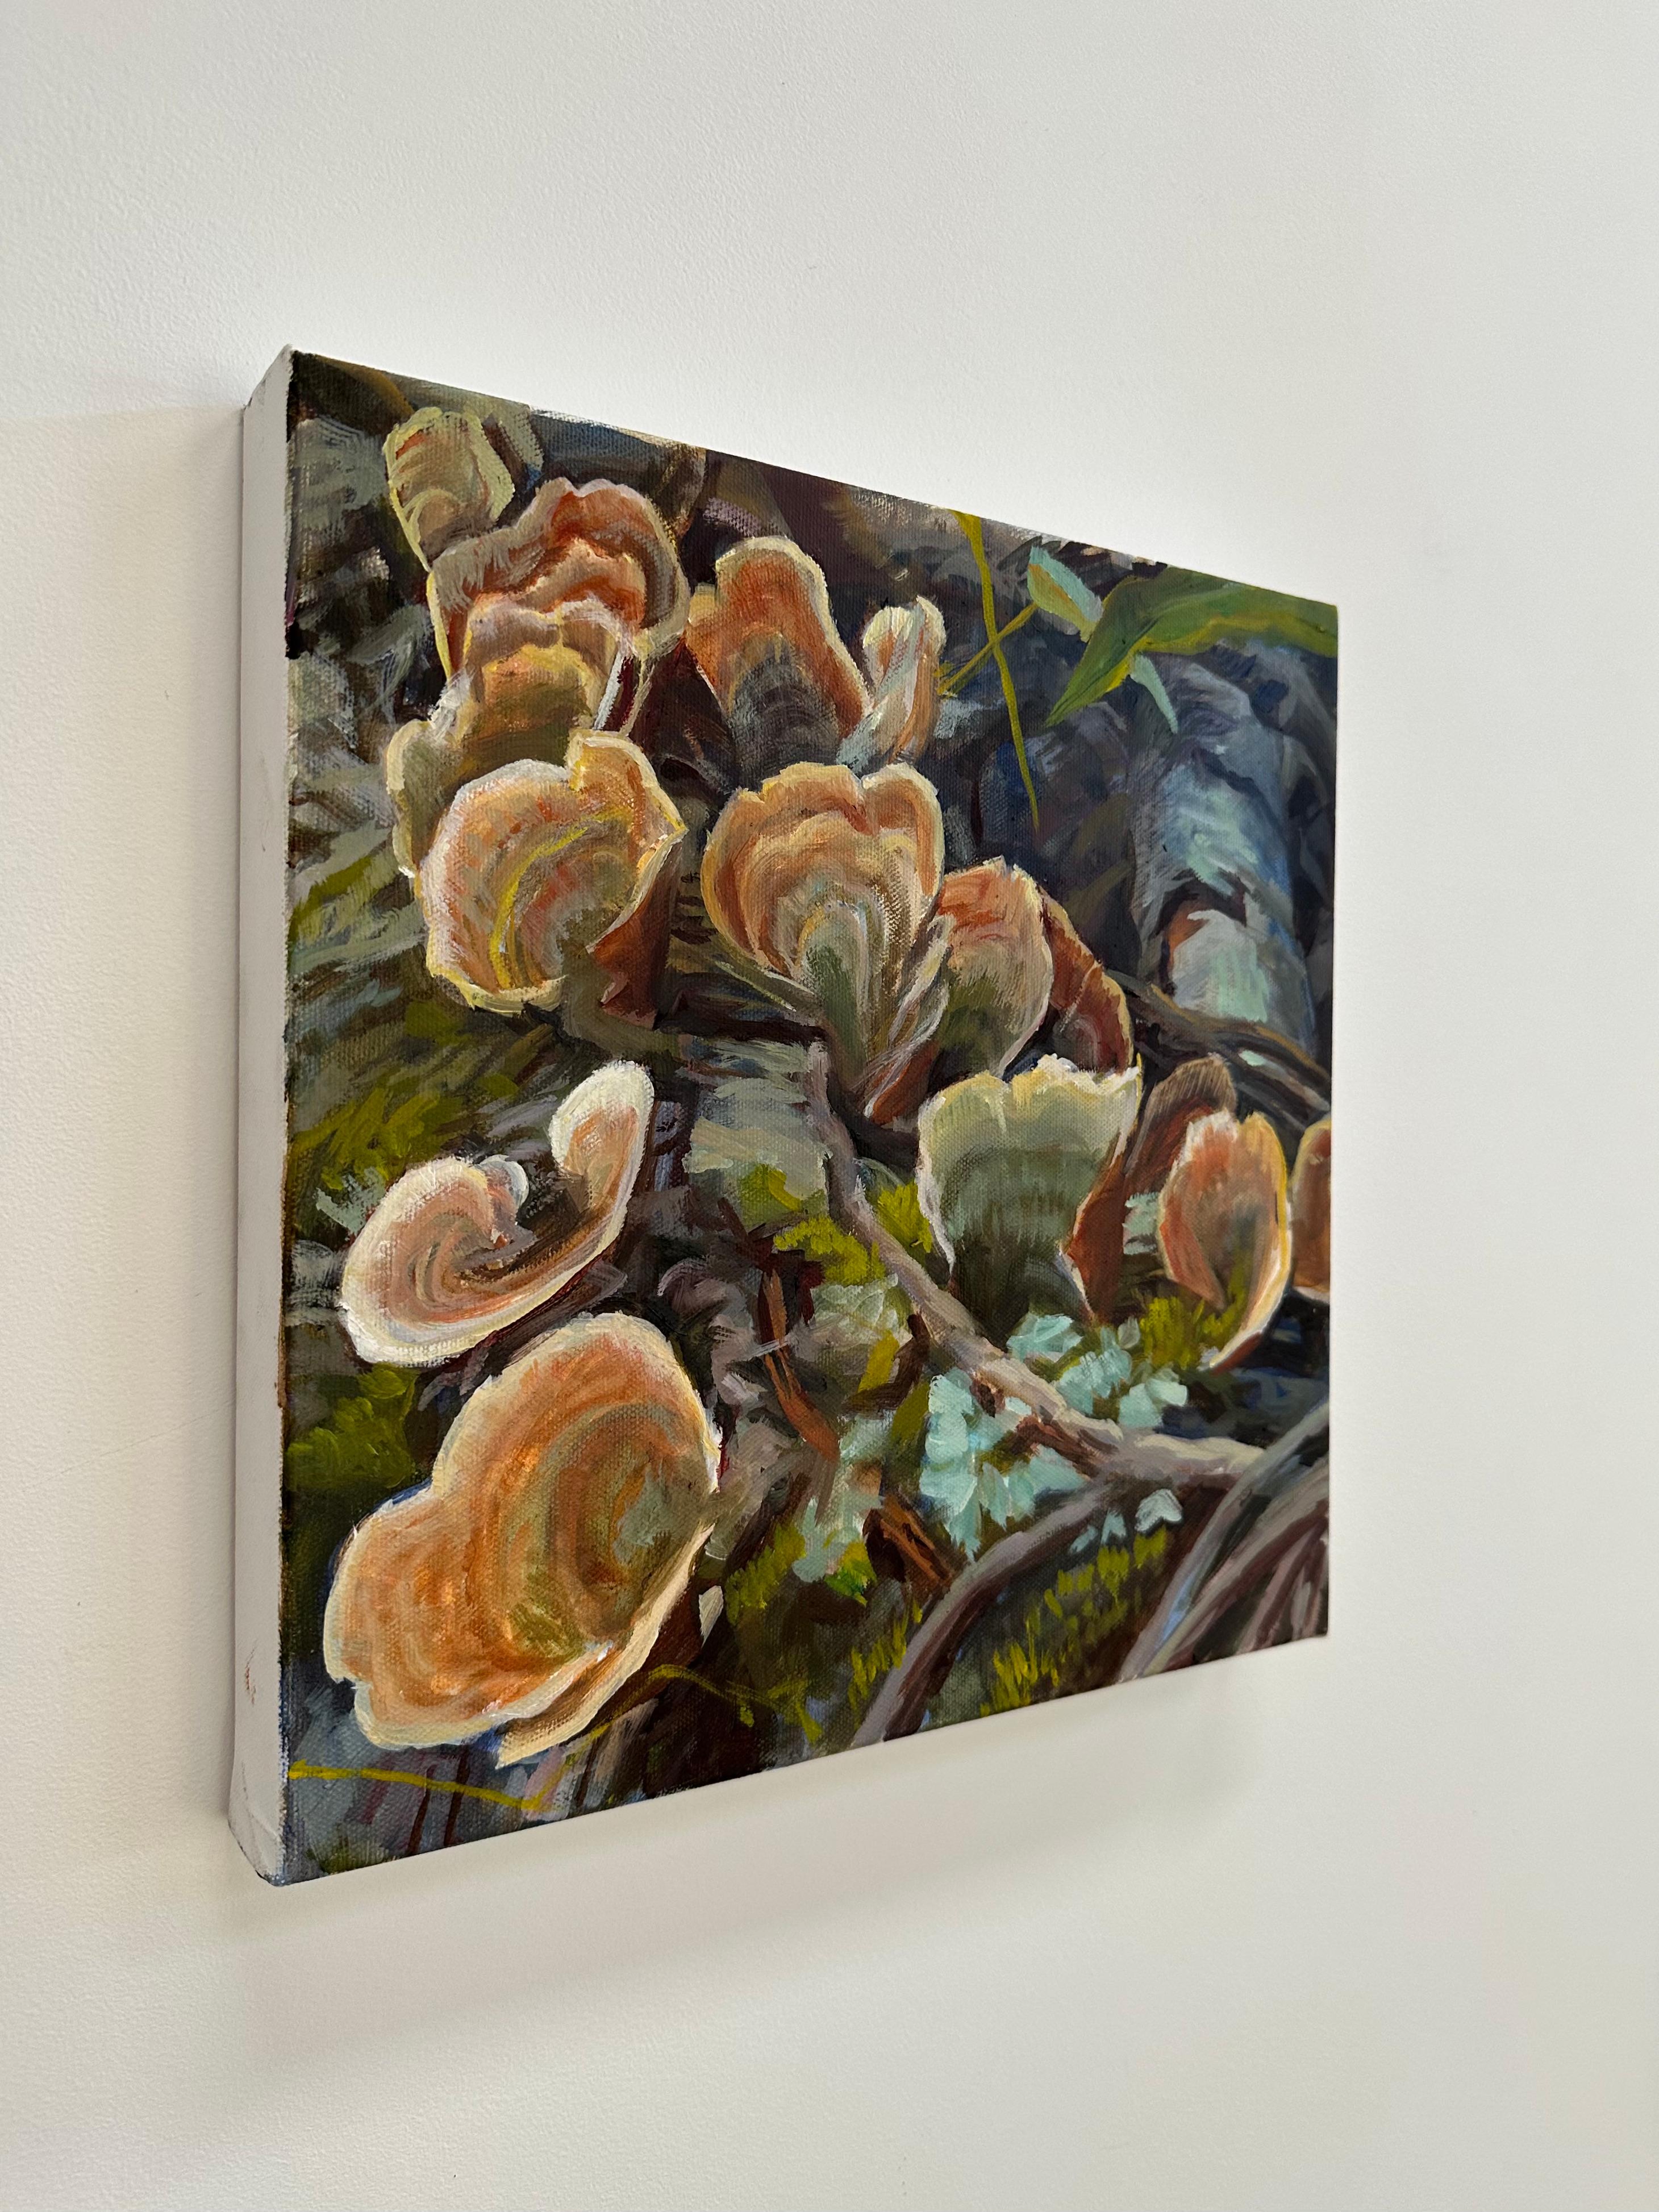 Turkey Tails, Old Growth Forest, Fungi, Mushroom, Orange, Brown, Moss Green - Contemporary Painting by Andrea Kantrowitz